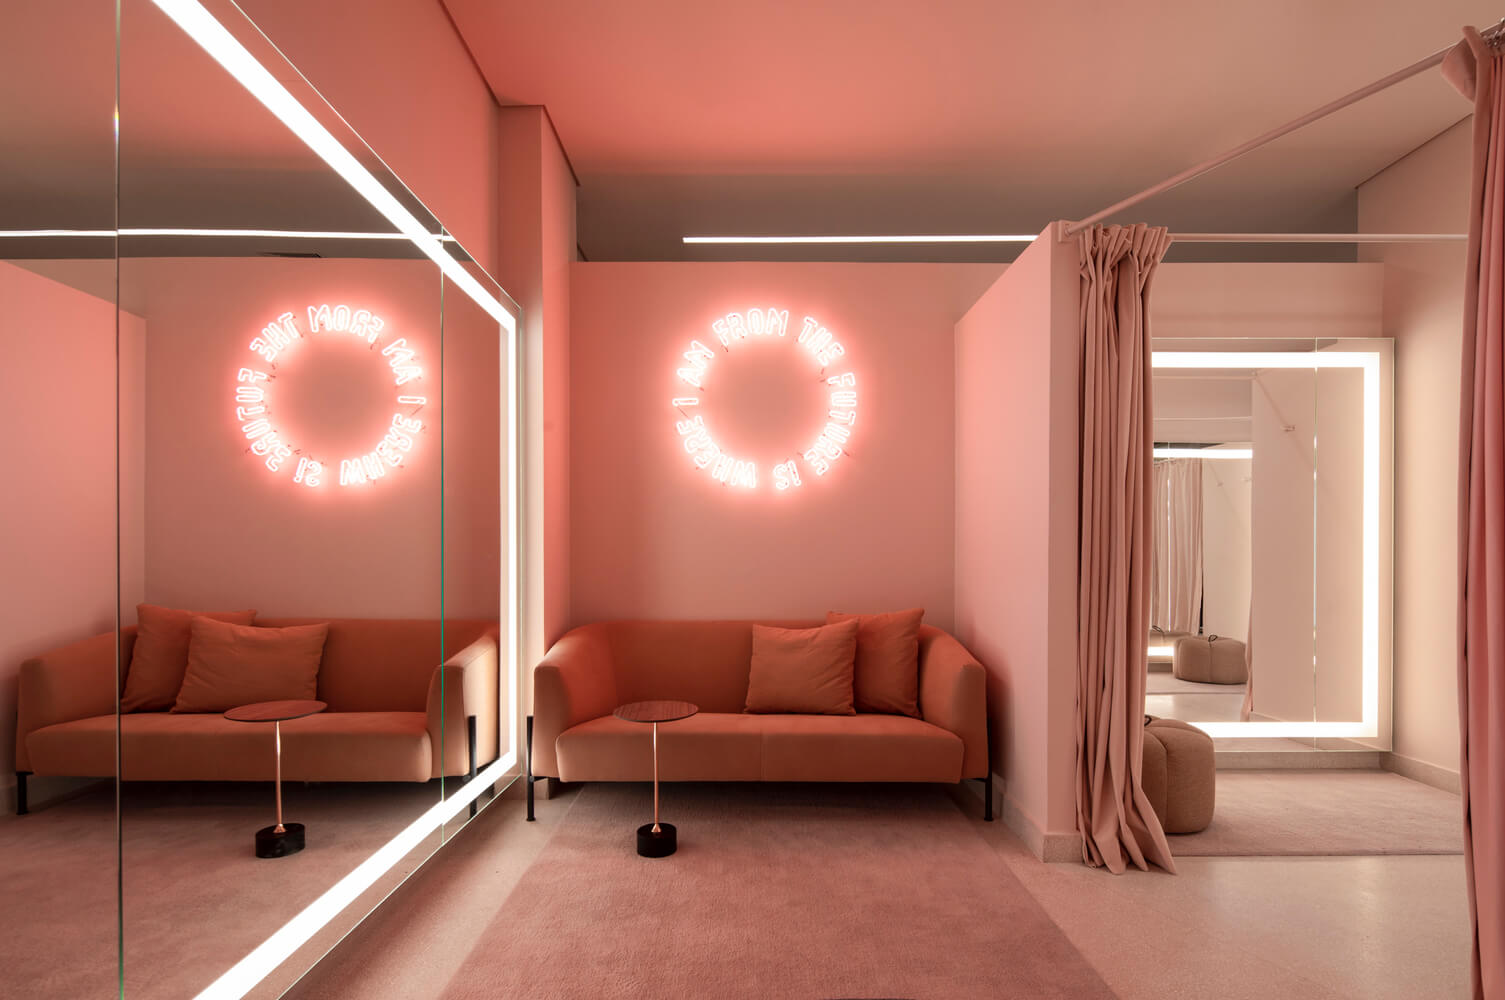 The right fitting room lights are shown to help improve sales in retail clothing stores